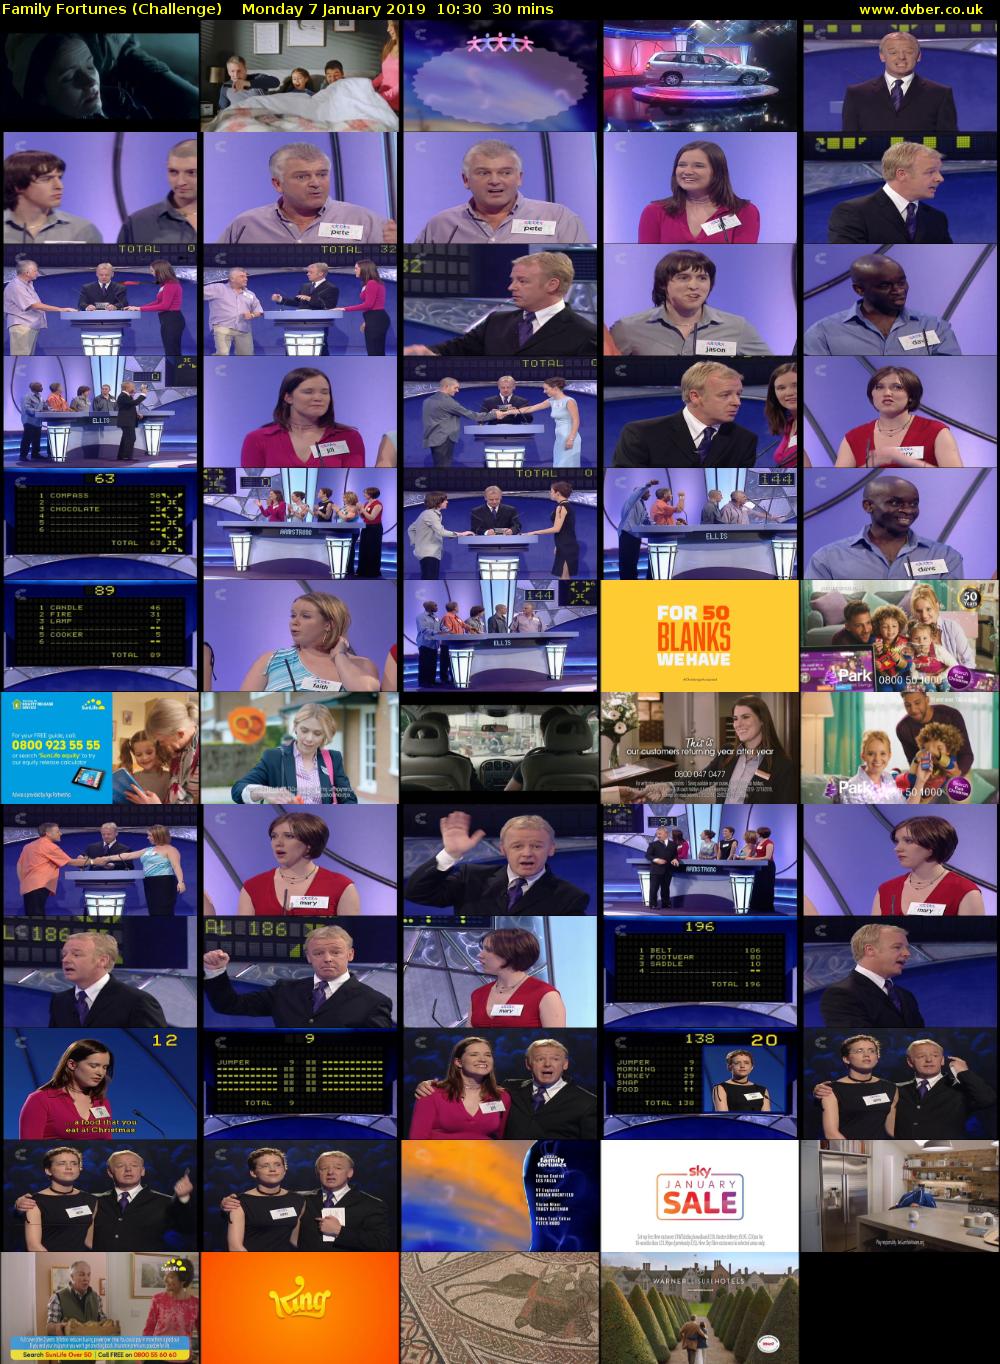 Family Fortunes (Challenge) Monday 7 January 2019 10:30 - 11:00